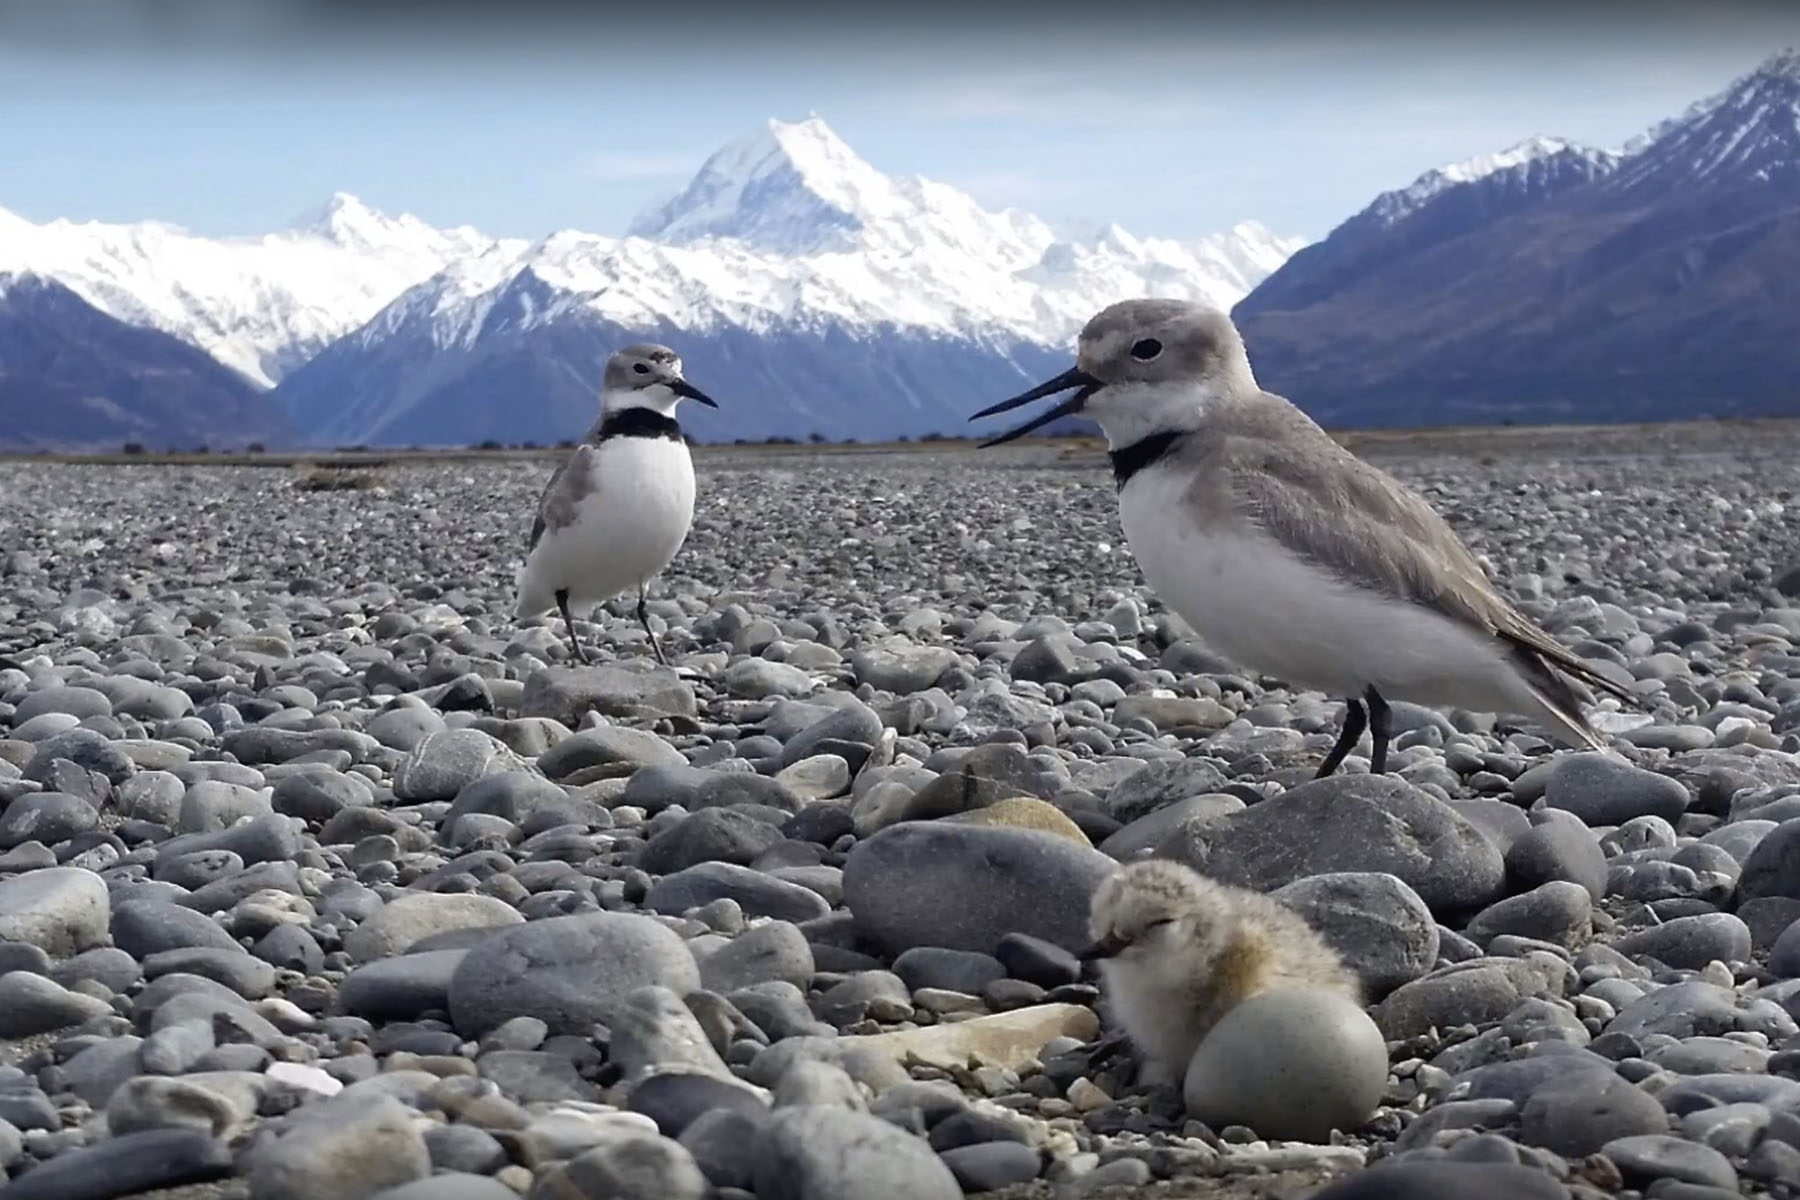 Proud wrybill | ngutuparore parents with chick and egg, Aoraki Mt Cook | Image: Philip Guilford